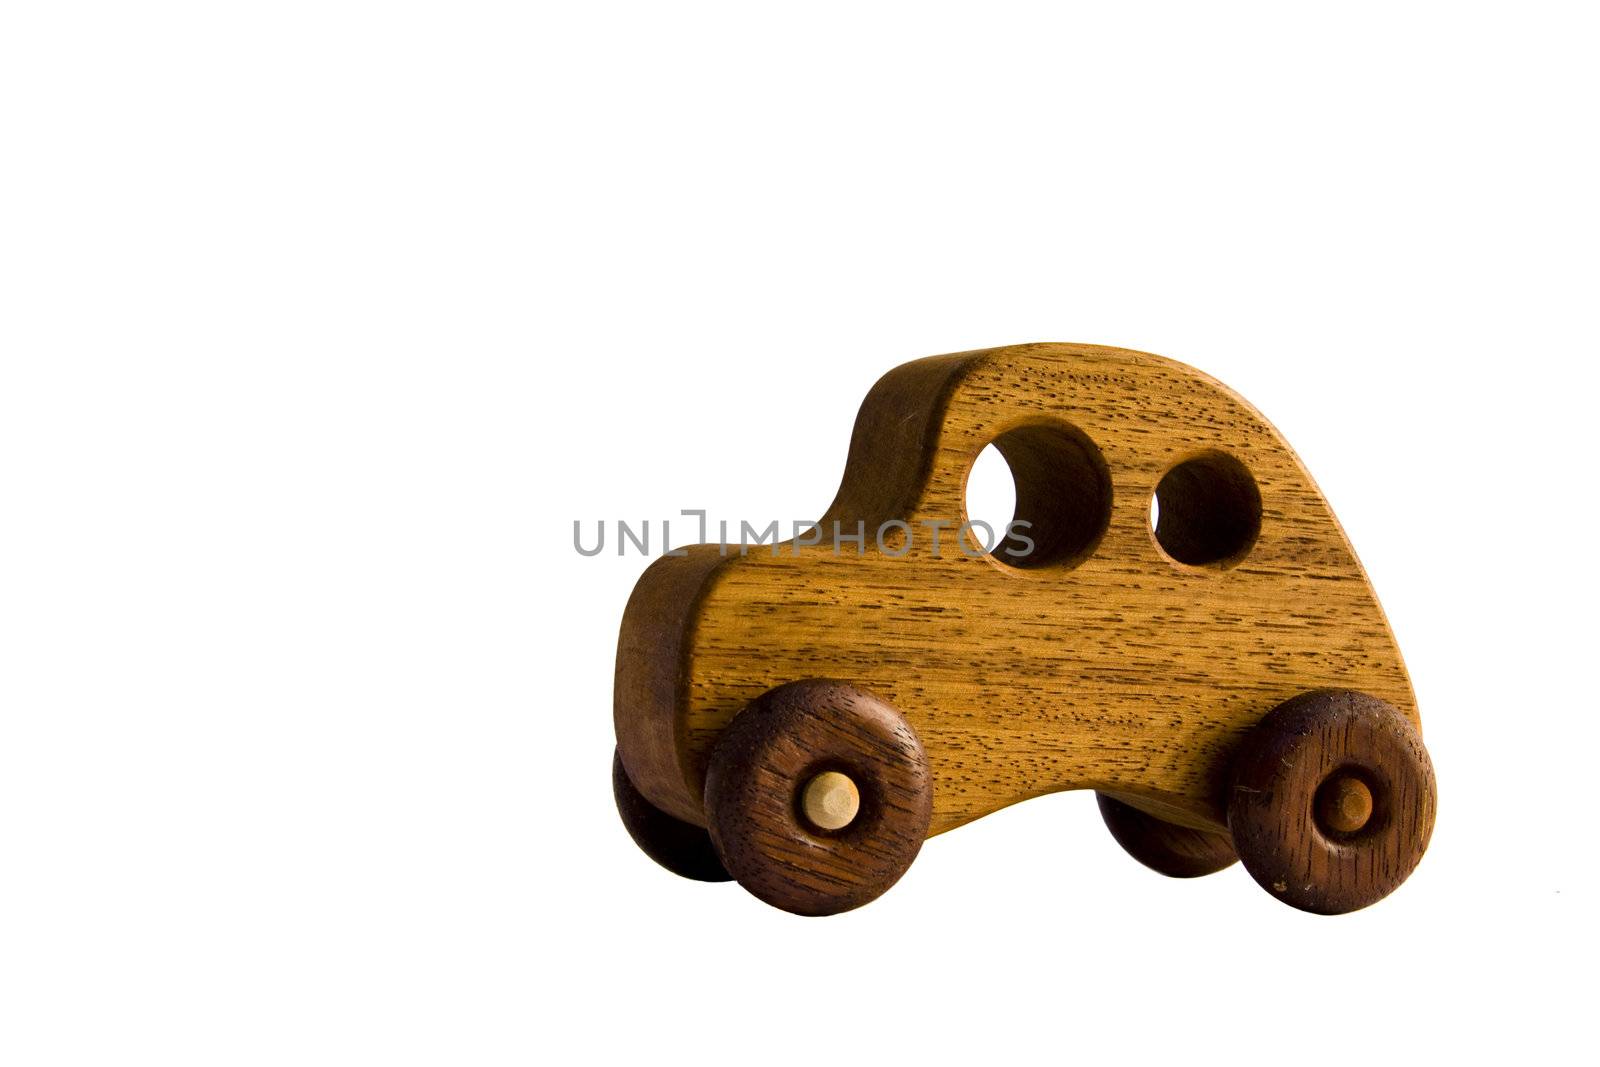 A funky wooden retro toy car with clipping path by Jaykayl